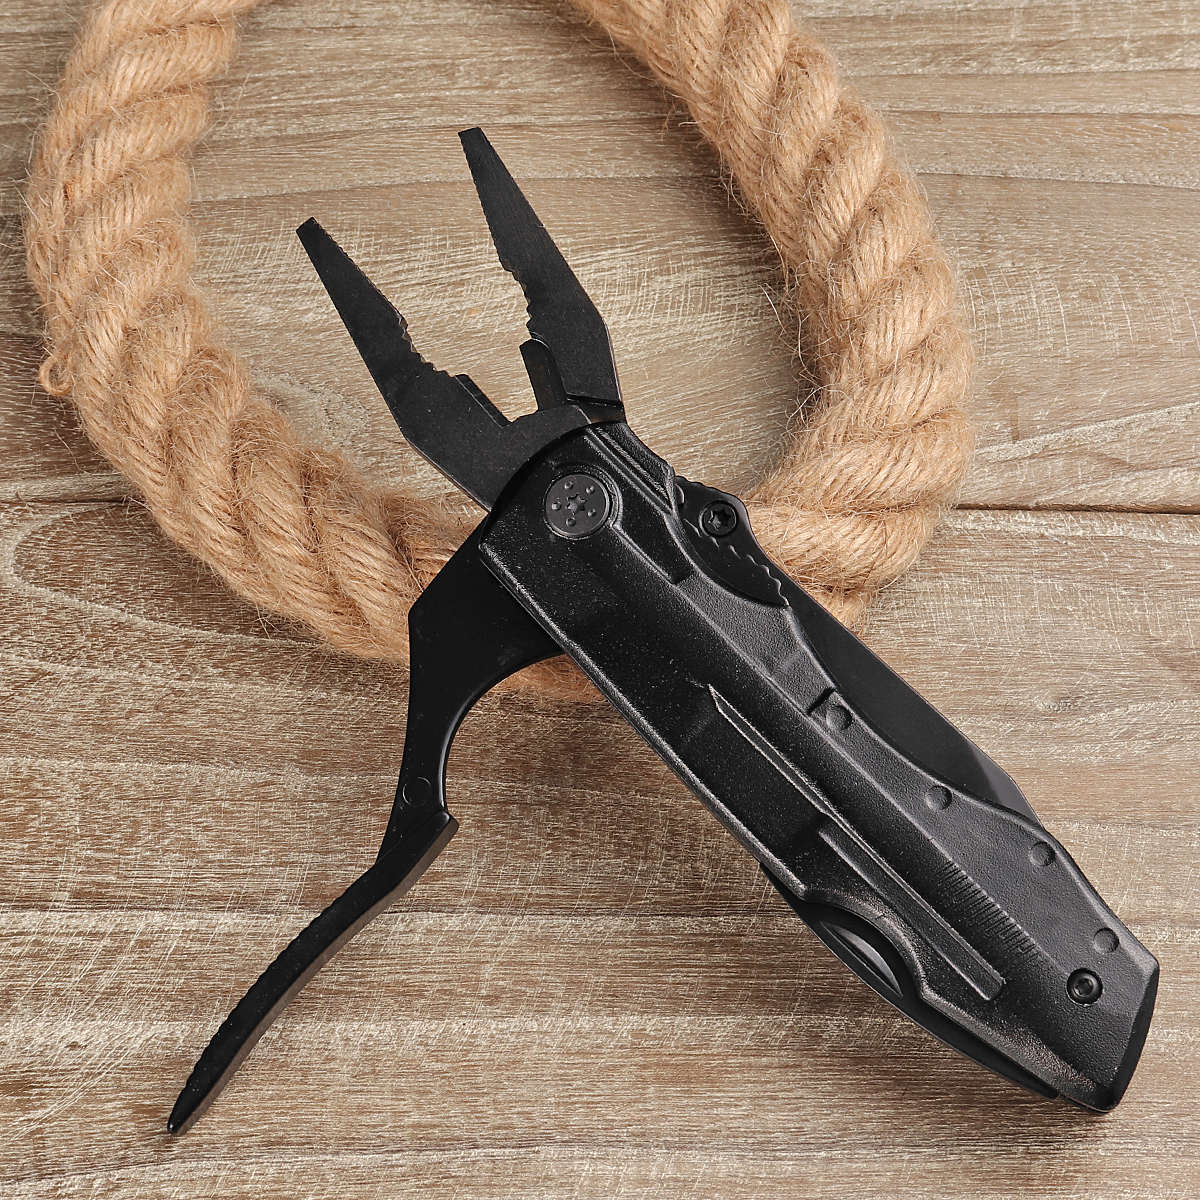 18-In-1-Multi-function-Folding-Tactical-Tool-Kitchen-Bottle-Opener-Sharp-Pocket-Multitool-Pliers-Saw-1736435-10